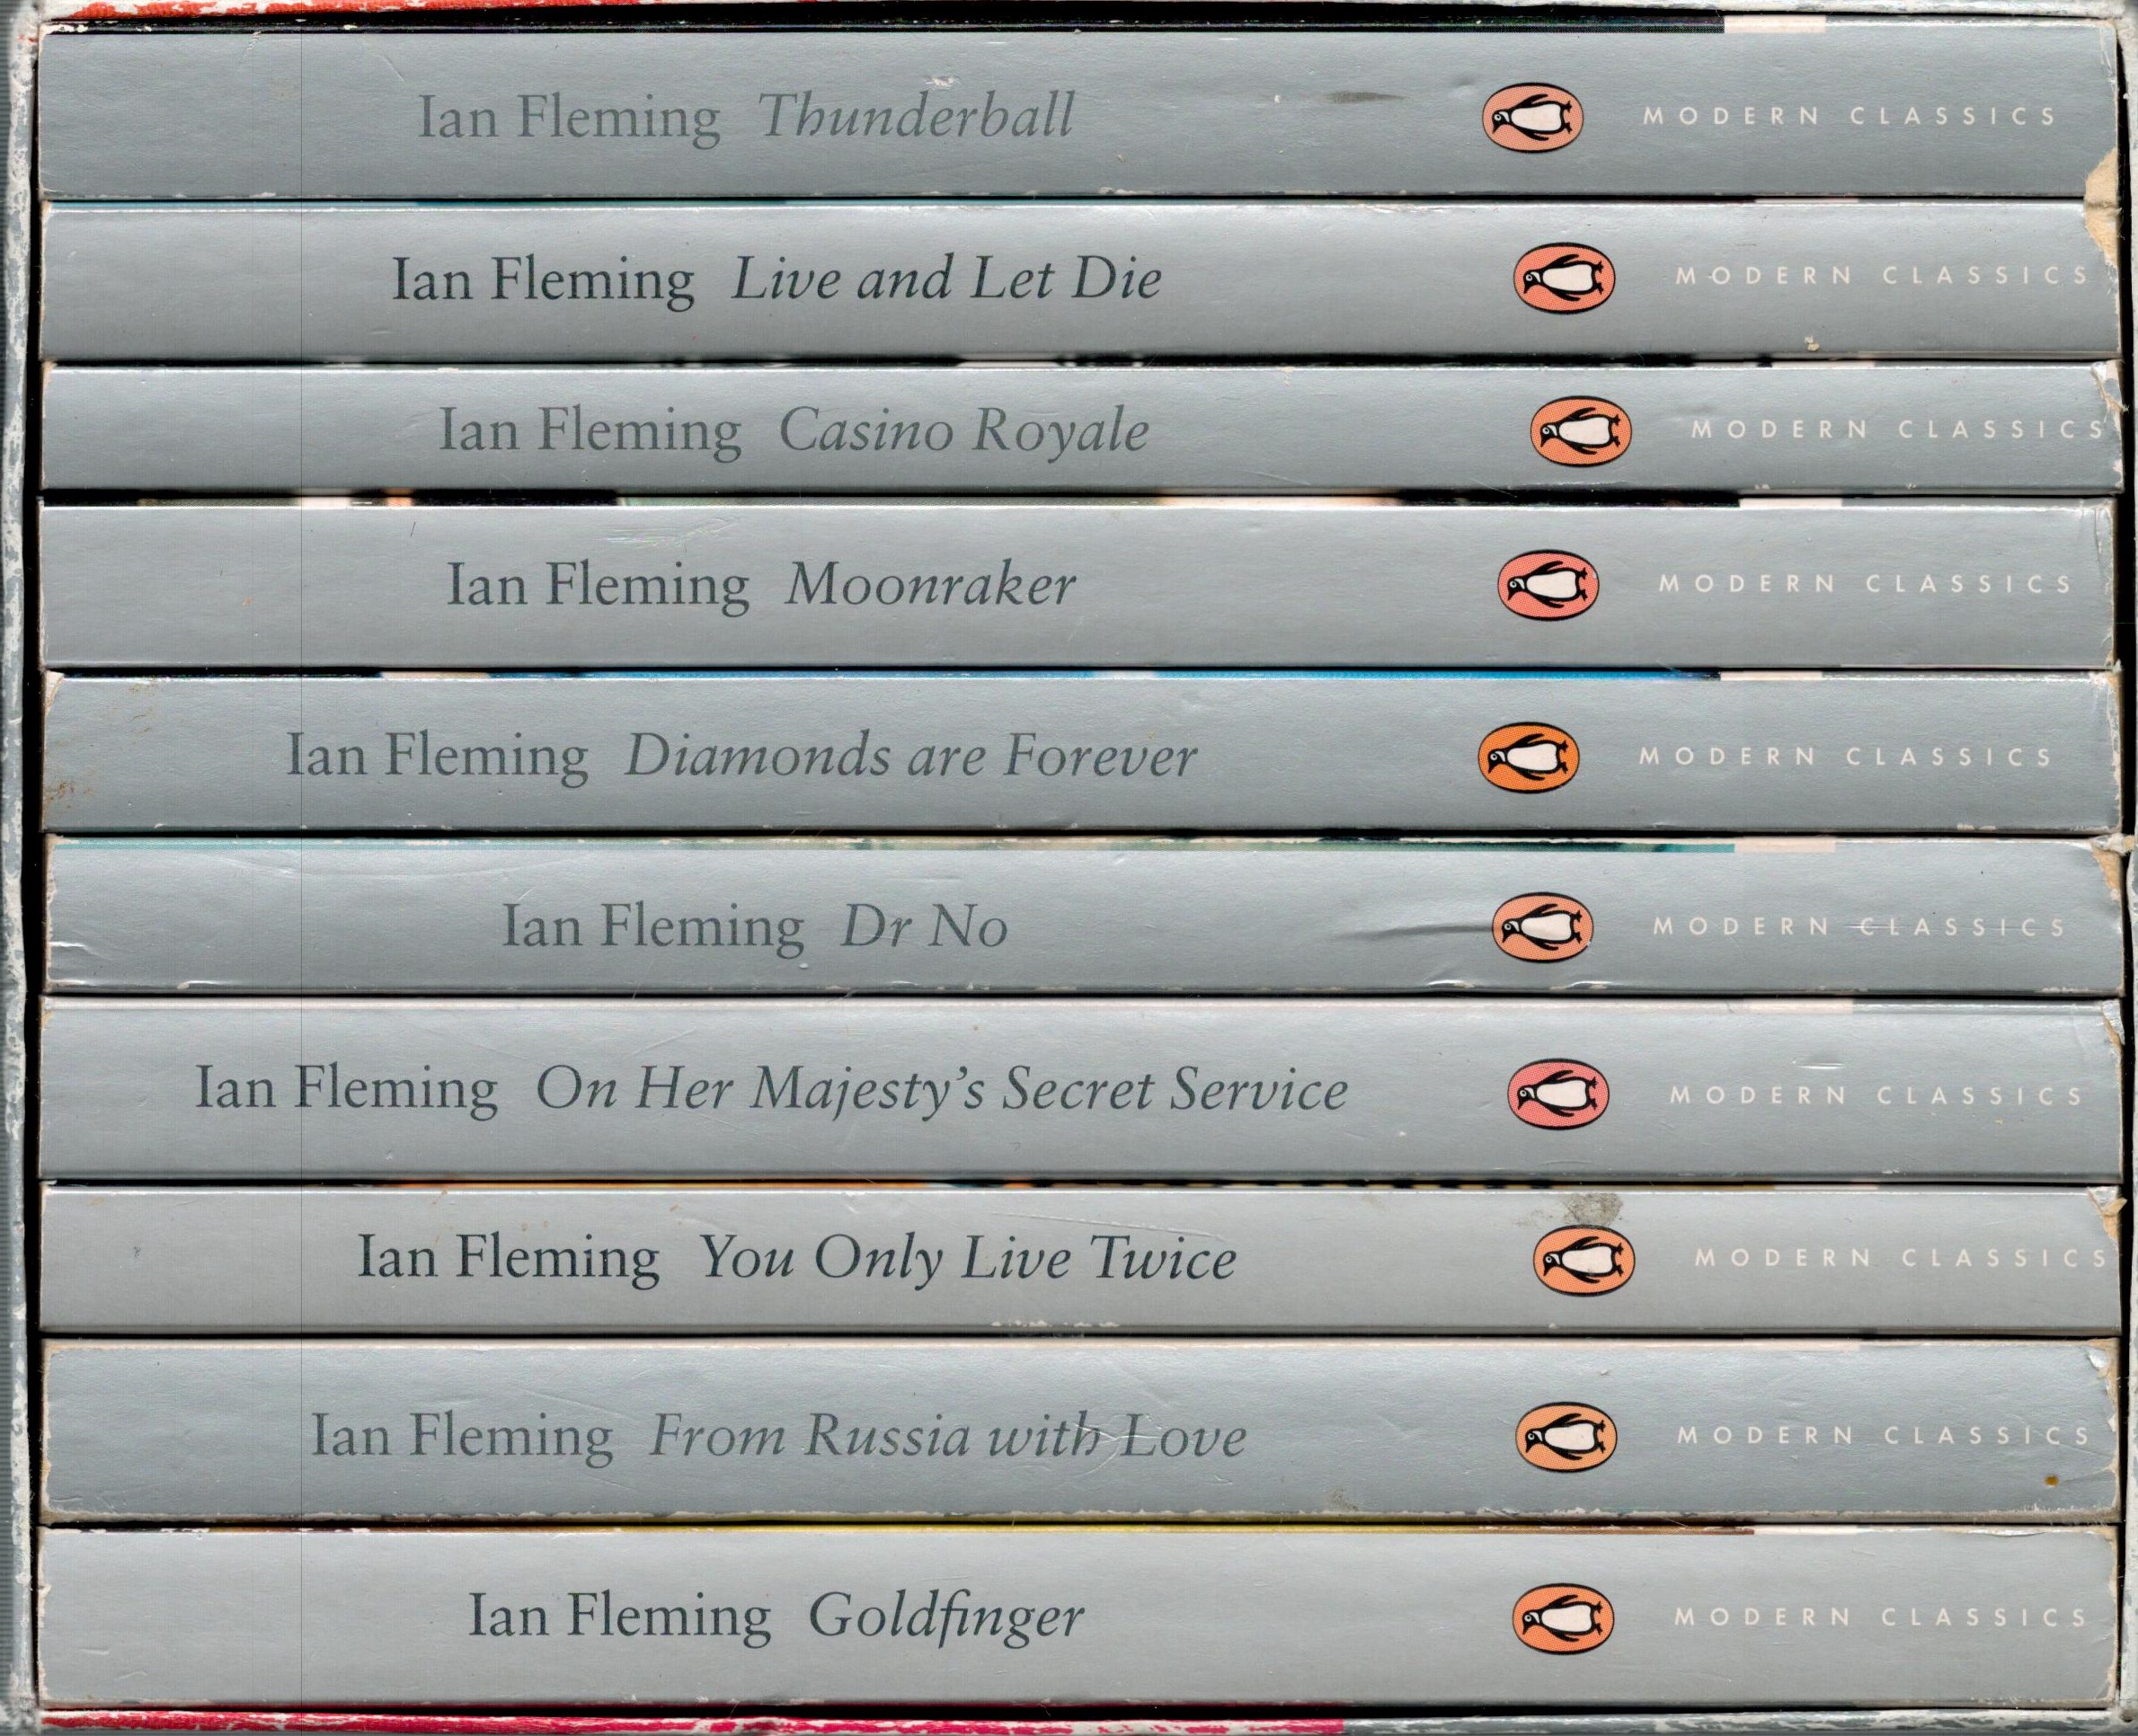 Box Set of 10 James Bond Books by Ian Fleming includes Thunderball, Live and Let Die, Casino